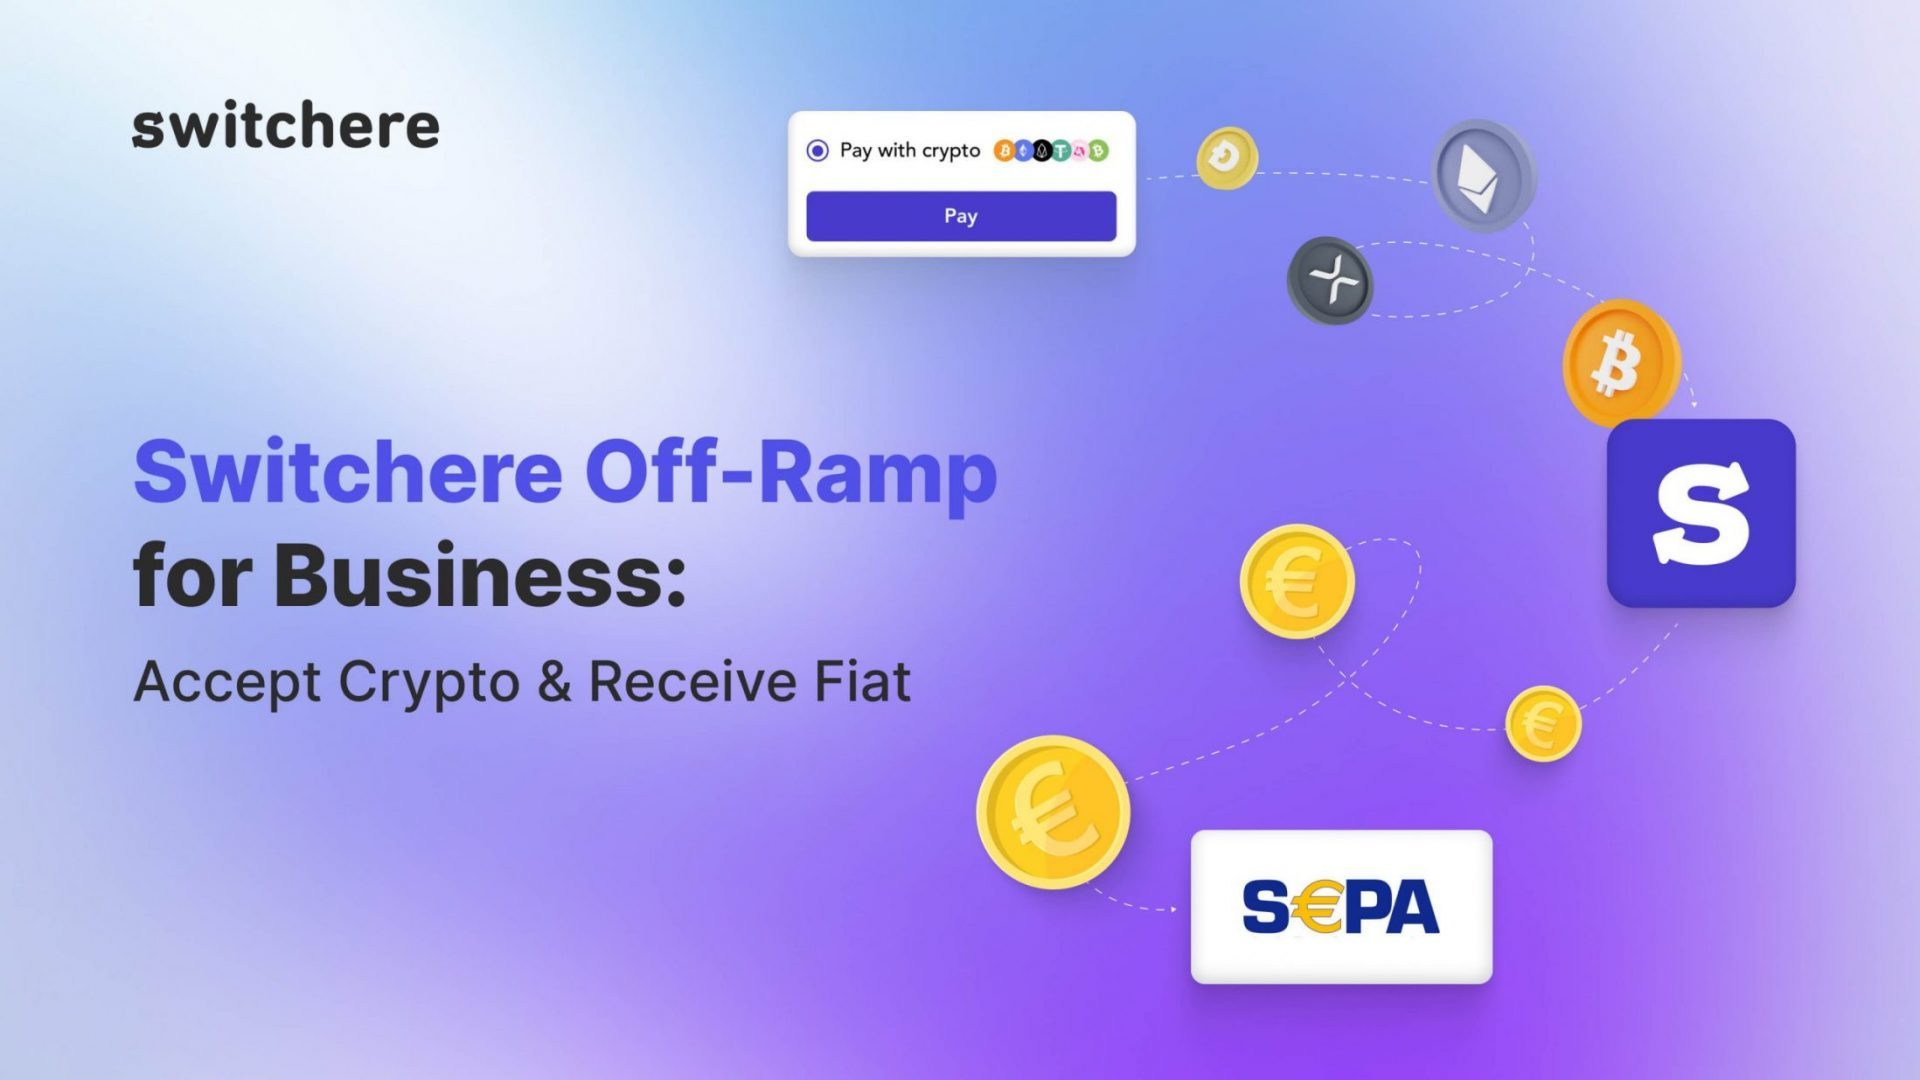 Switchere Off-Ramp for Business: Accept Crypto & Receive Fiat